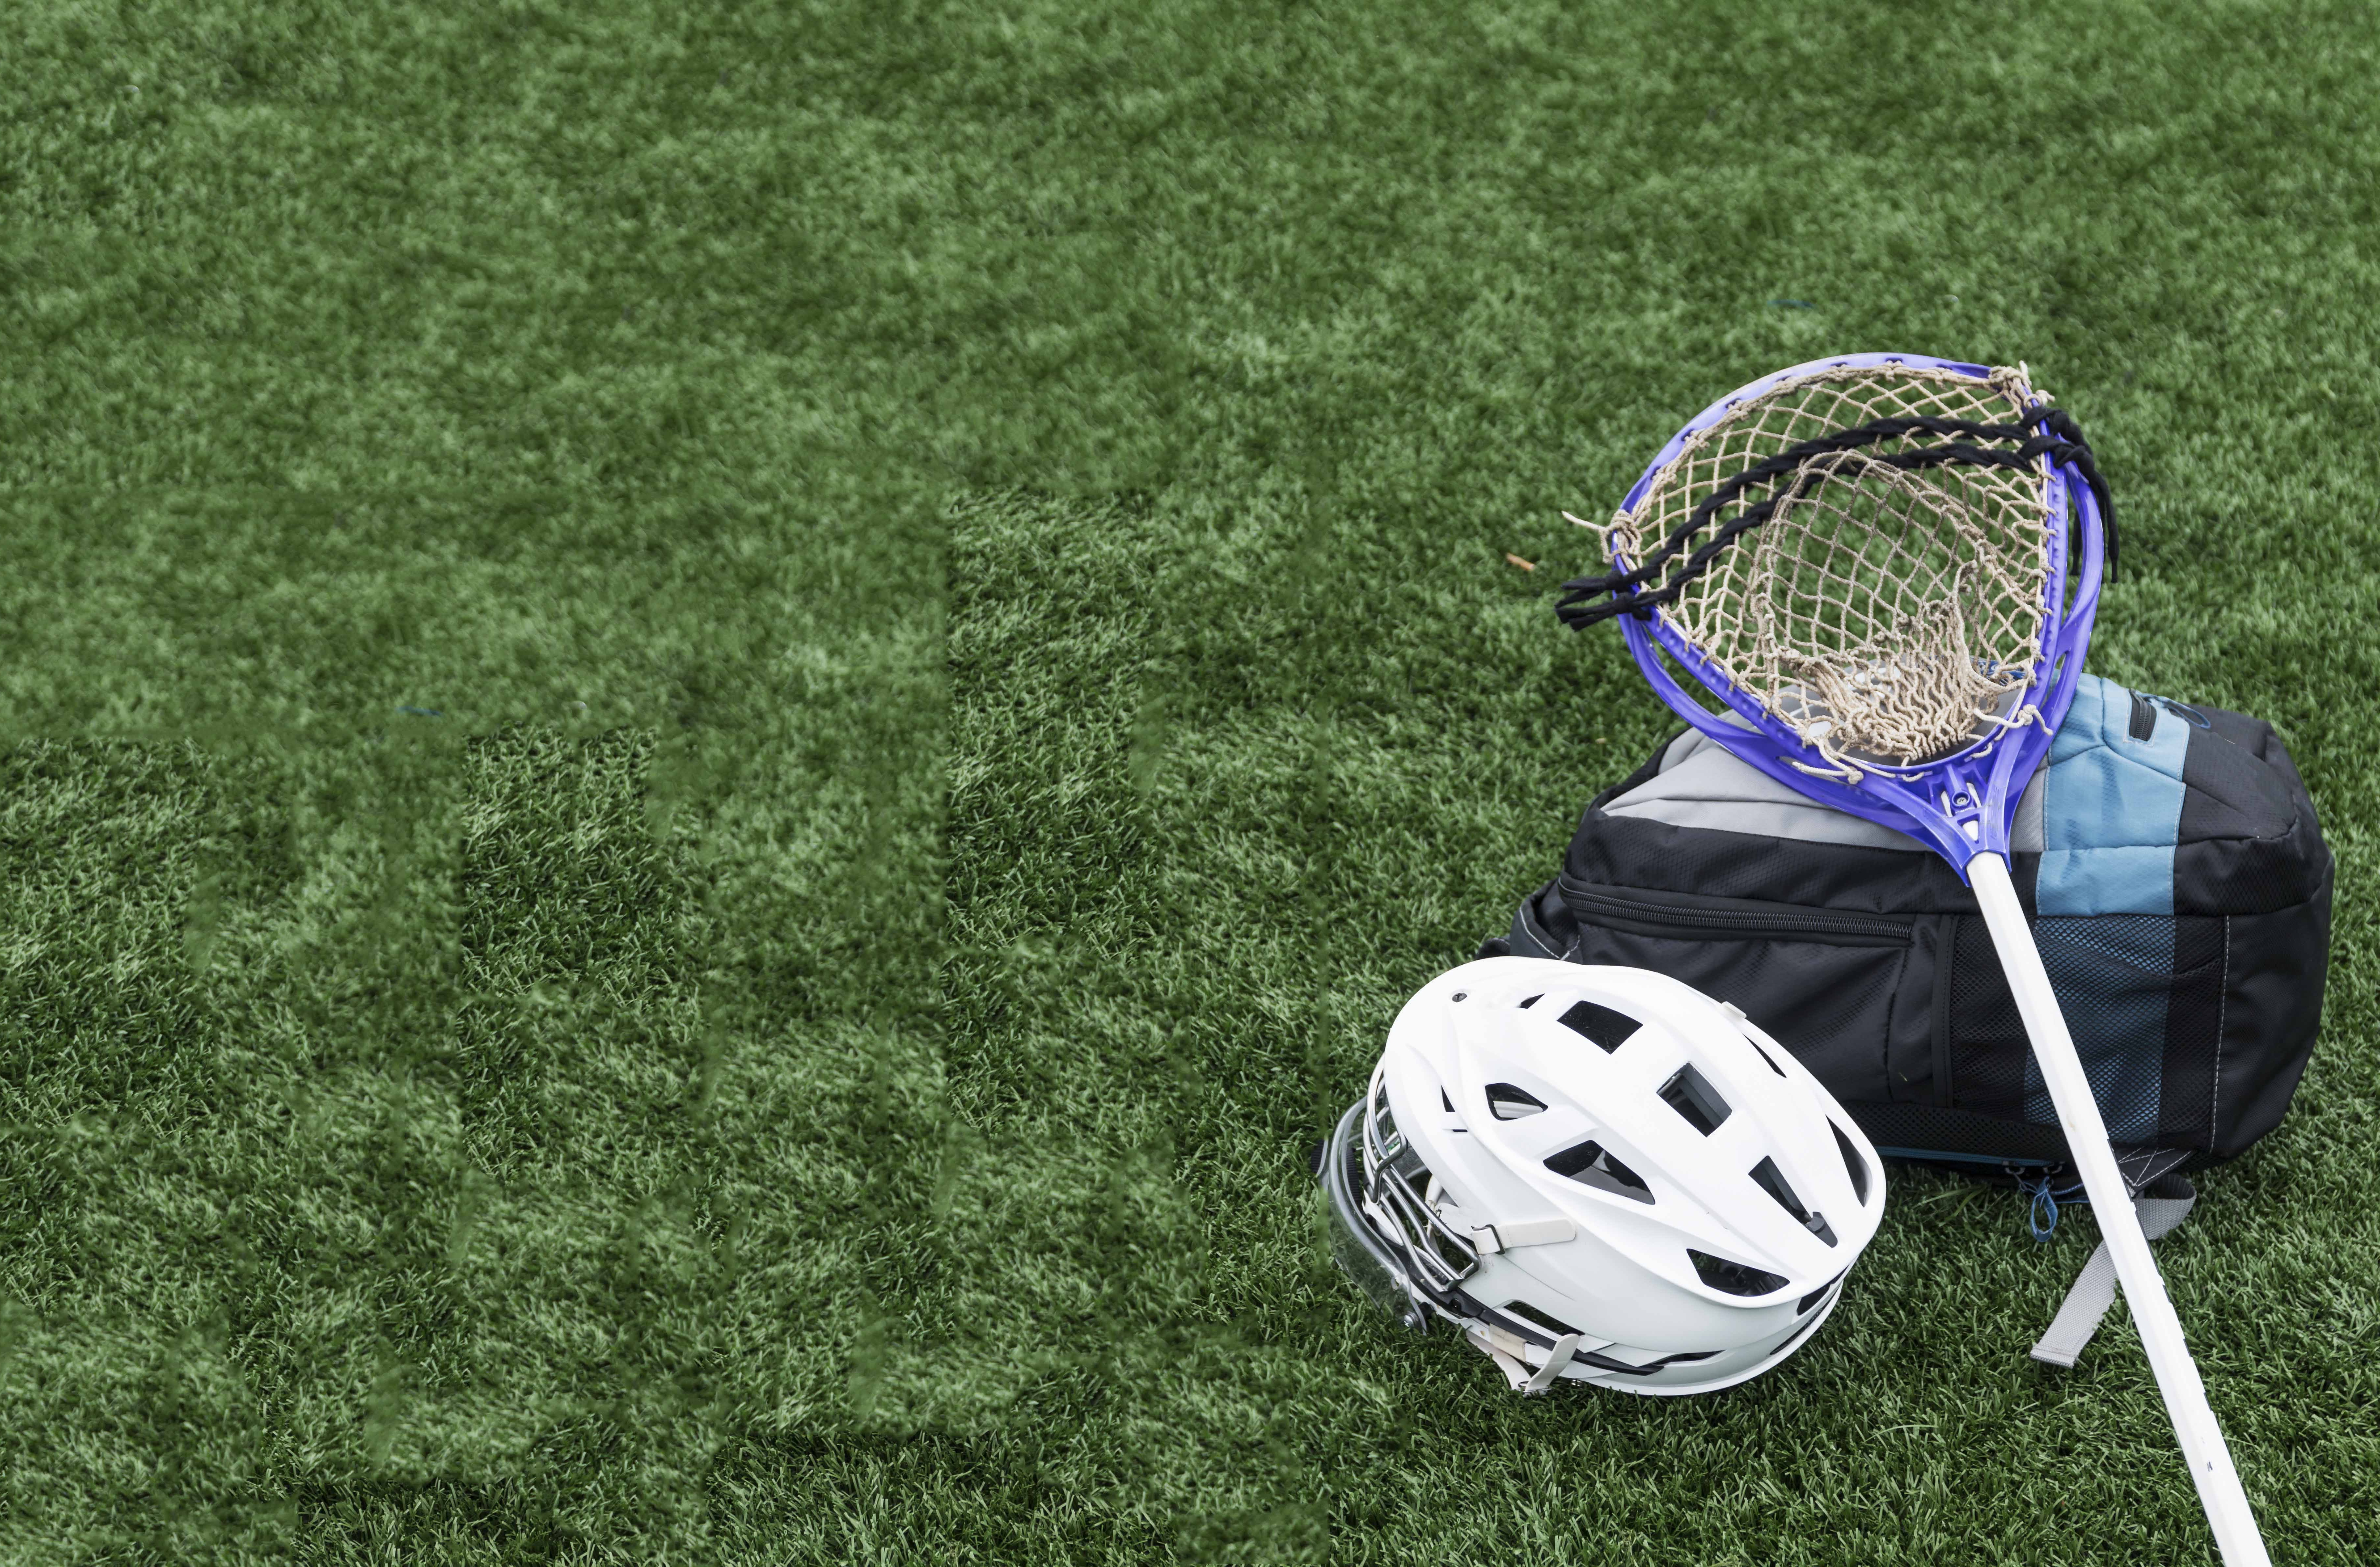 lacrosse equipment on the ground